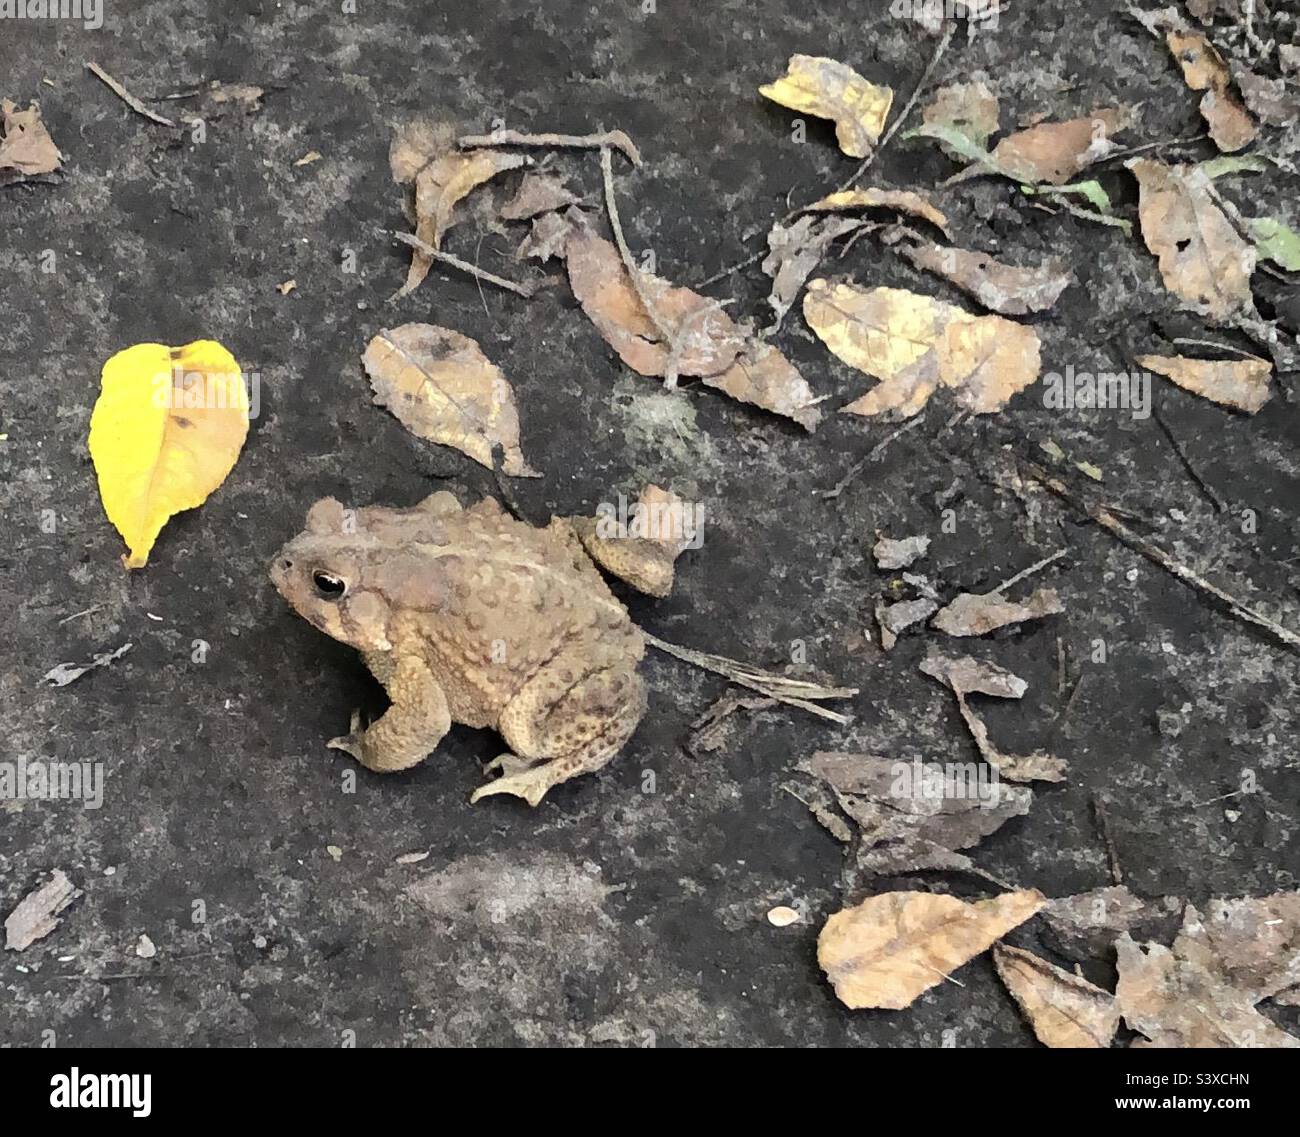 Camouflaged toad in the woods. Stock Photo